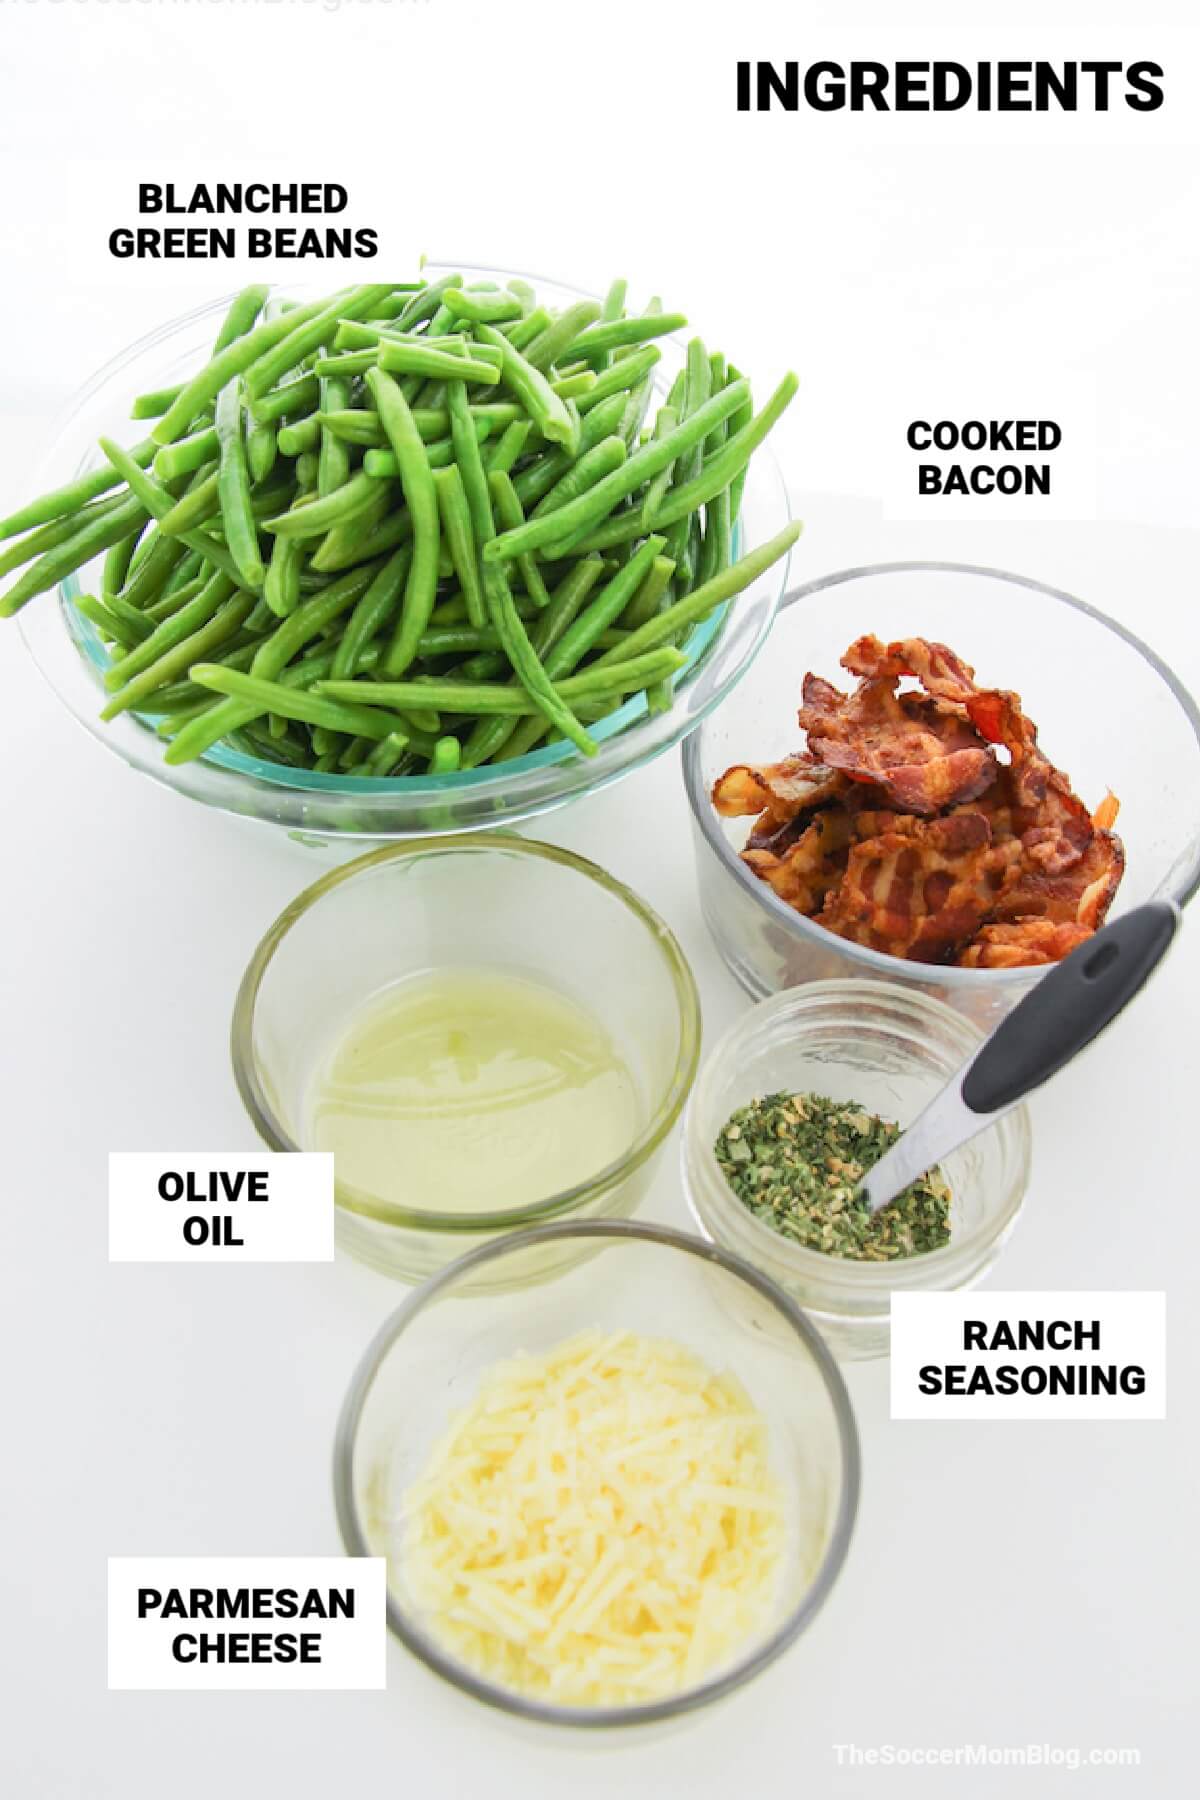 ingredients to make parmesan roasted green beans, with text labels.